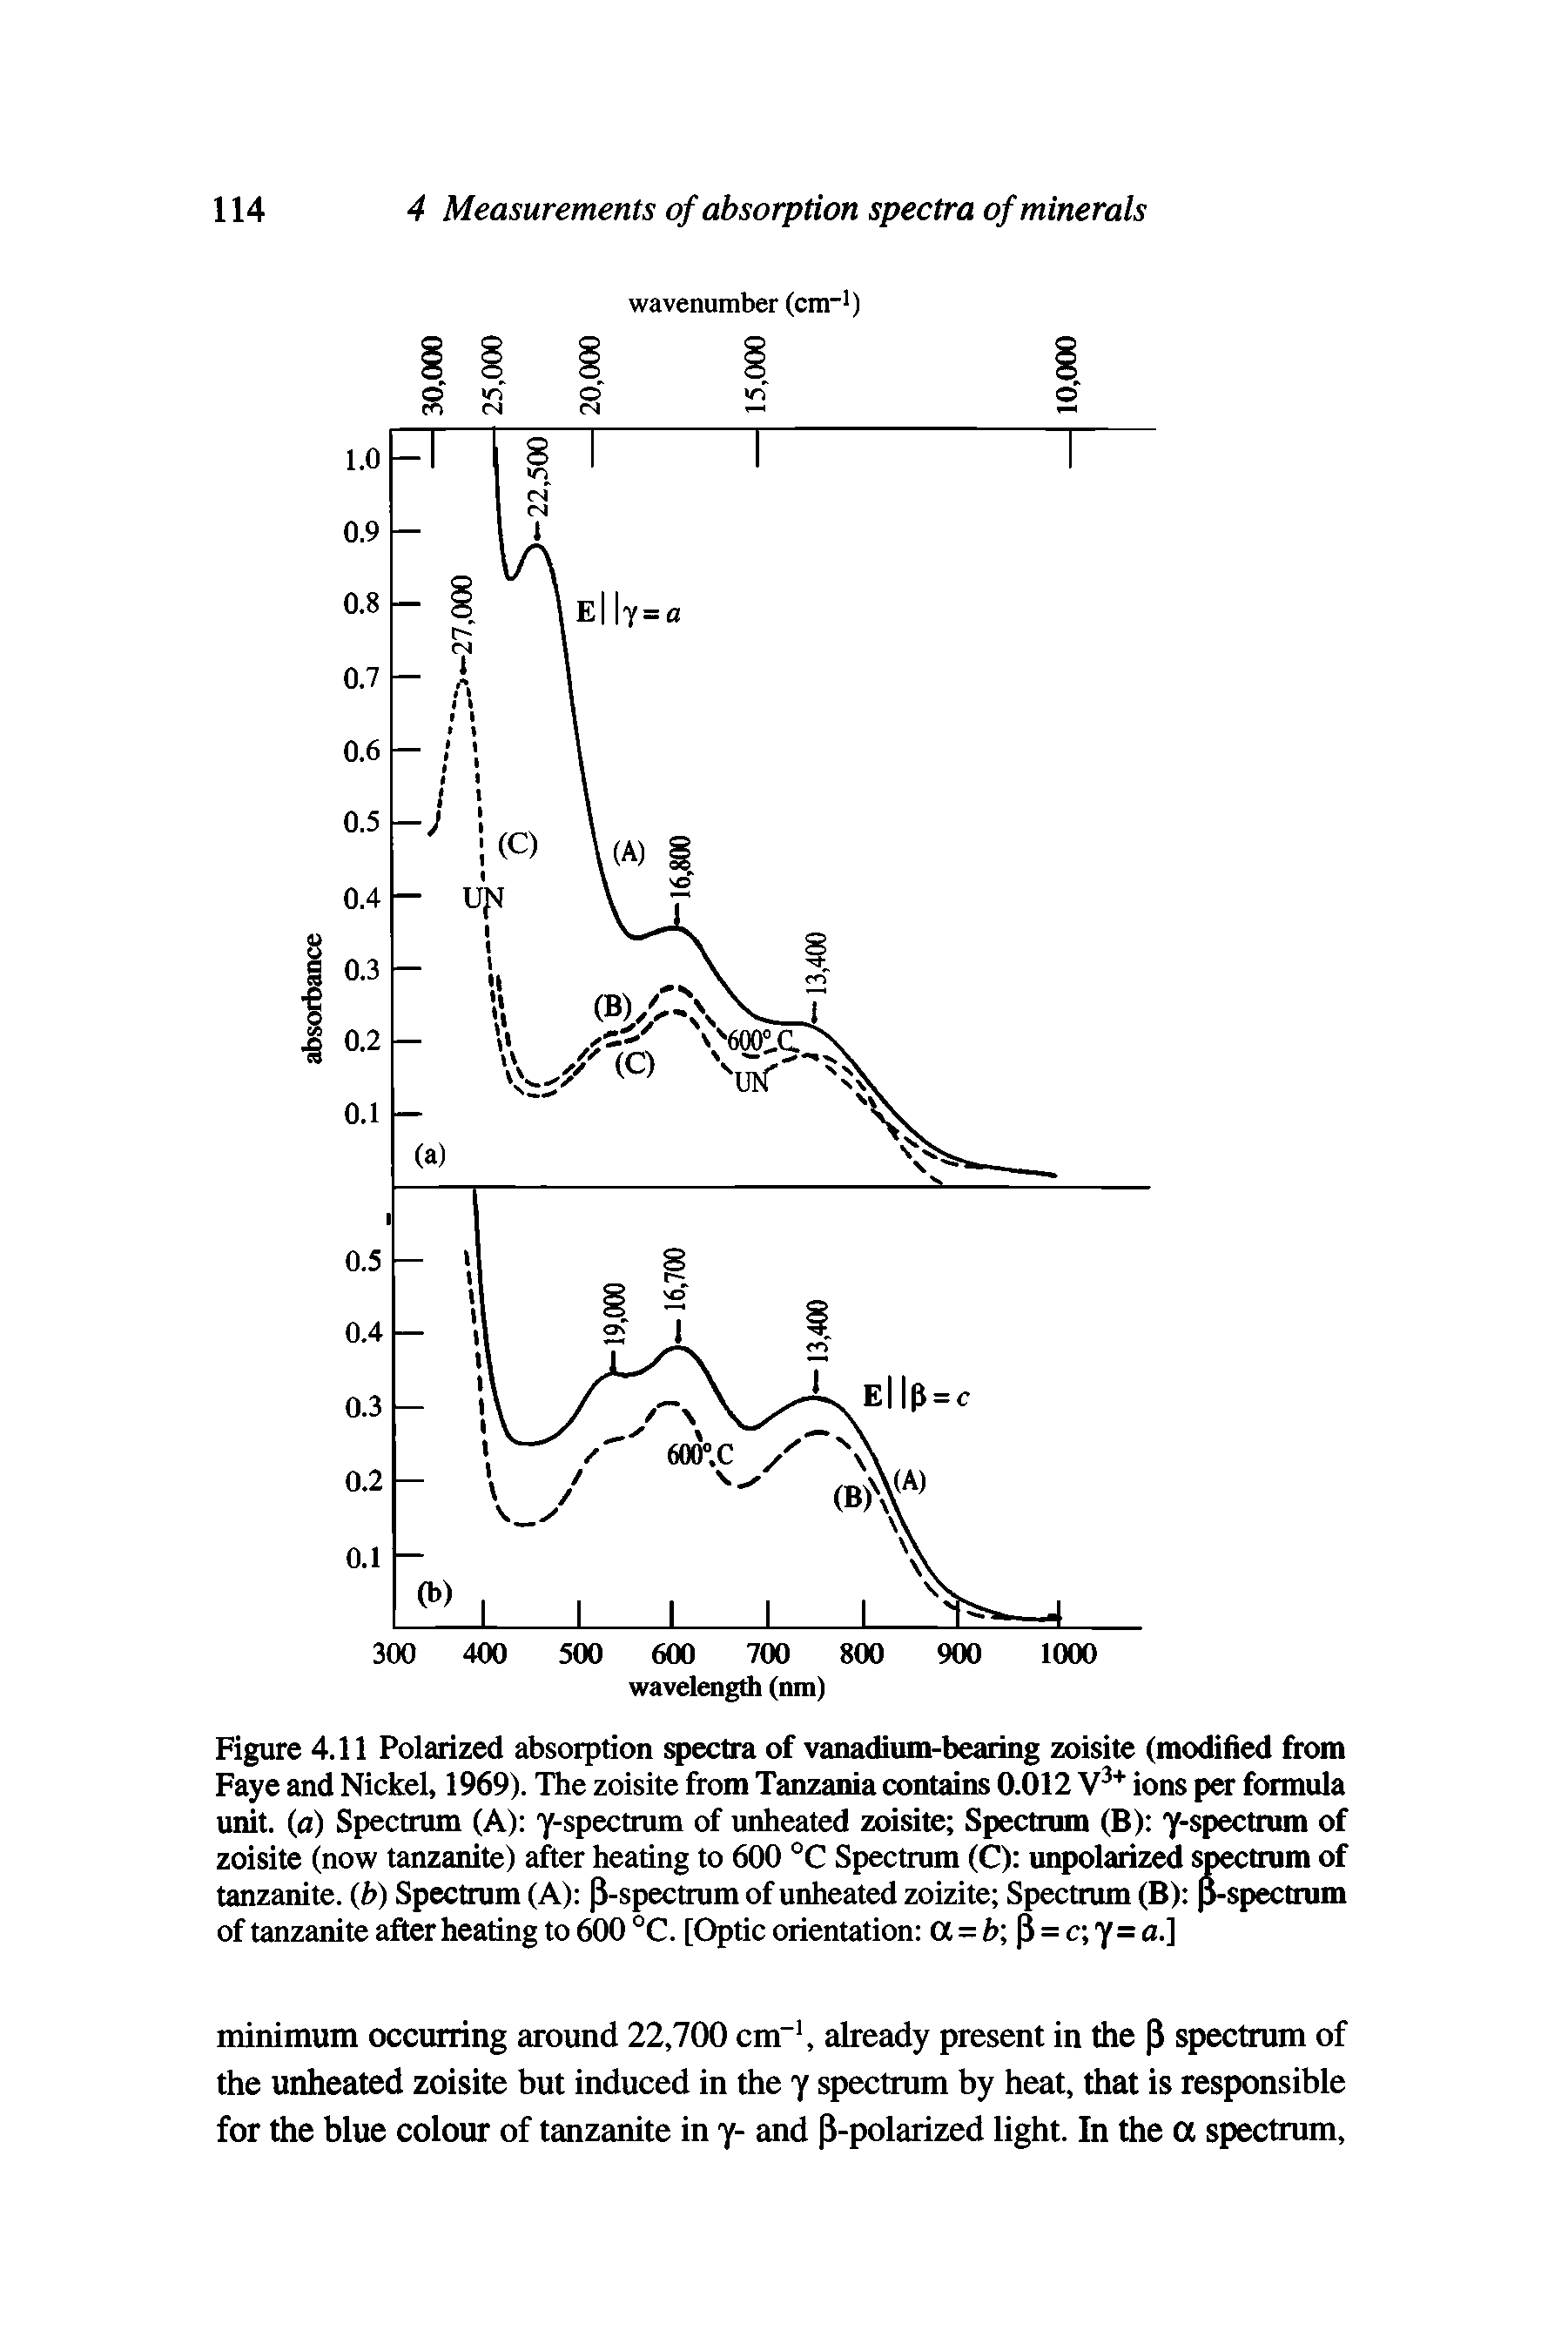 Figure 4.11 Polarized absorption spectra of vanadium-bearing zoisite (modified from Faye and Nickel, 1969). The zoisite from Tanzania contains 0.012 V3+ ions per formula unit, (a) Spectrum (A) y-spectrum of unheated zoisite Spectrum (B) y-spectrum of zoisite (now tanzanite) after heating to 600 °C Spectrum (C) unpolarized spectrum of tanzanite. (b) Spectrum (A) (1-spectrum of unheated zoizite Spectrum (B) p-spectrum of tanzanite after heating to 600 °C. [Optic orientation 0C = b P = c y = a.]...